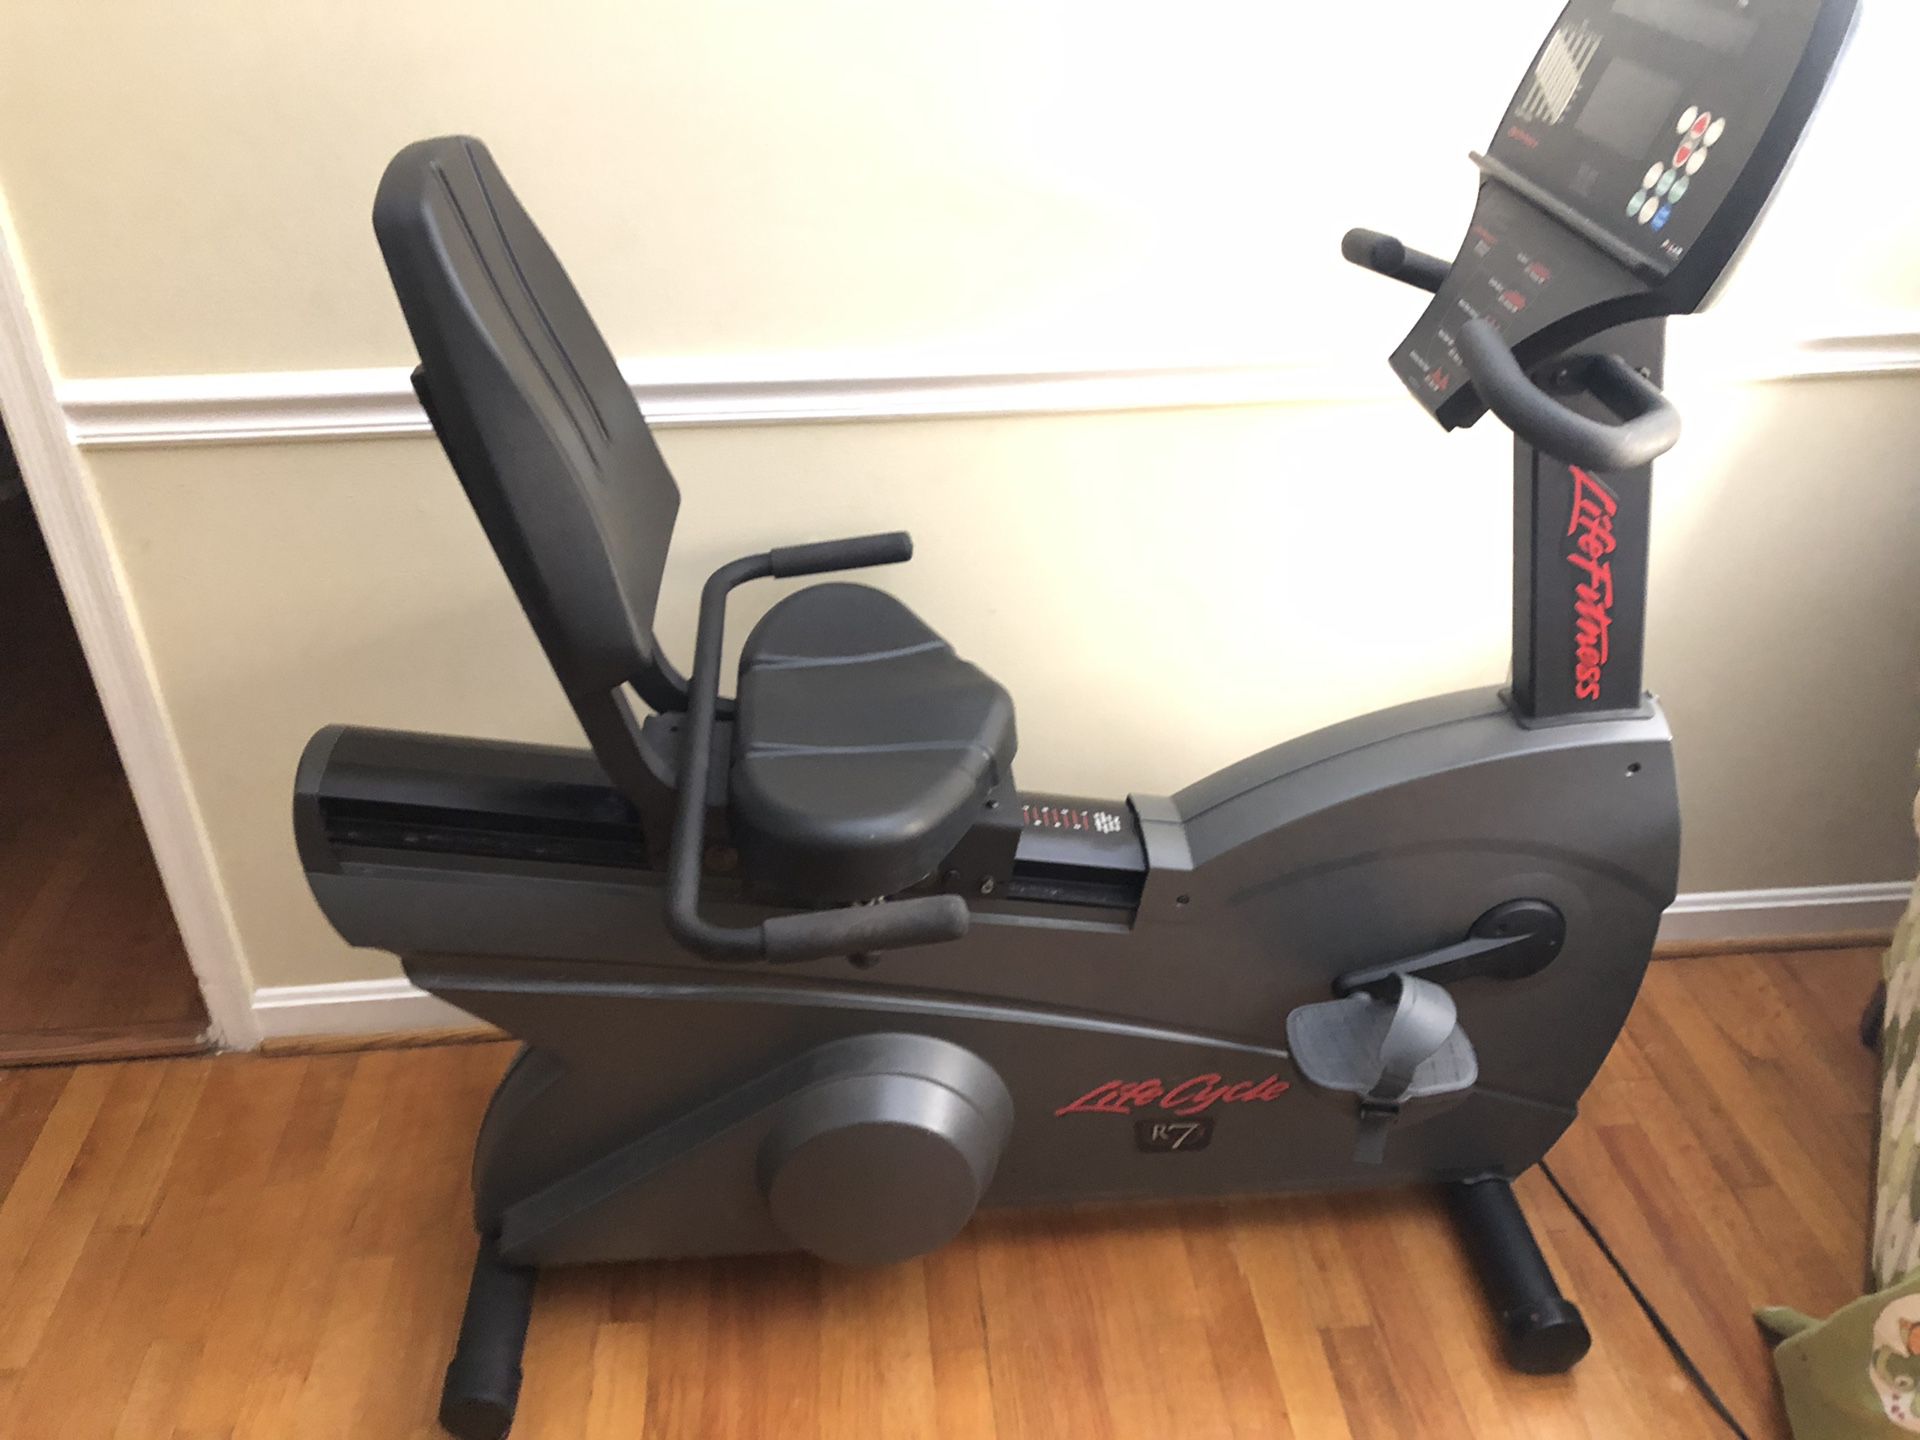 PRE-OWNED Life Cycle R7i Recumbent Exercise Bike